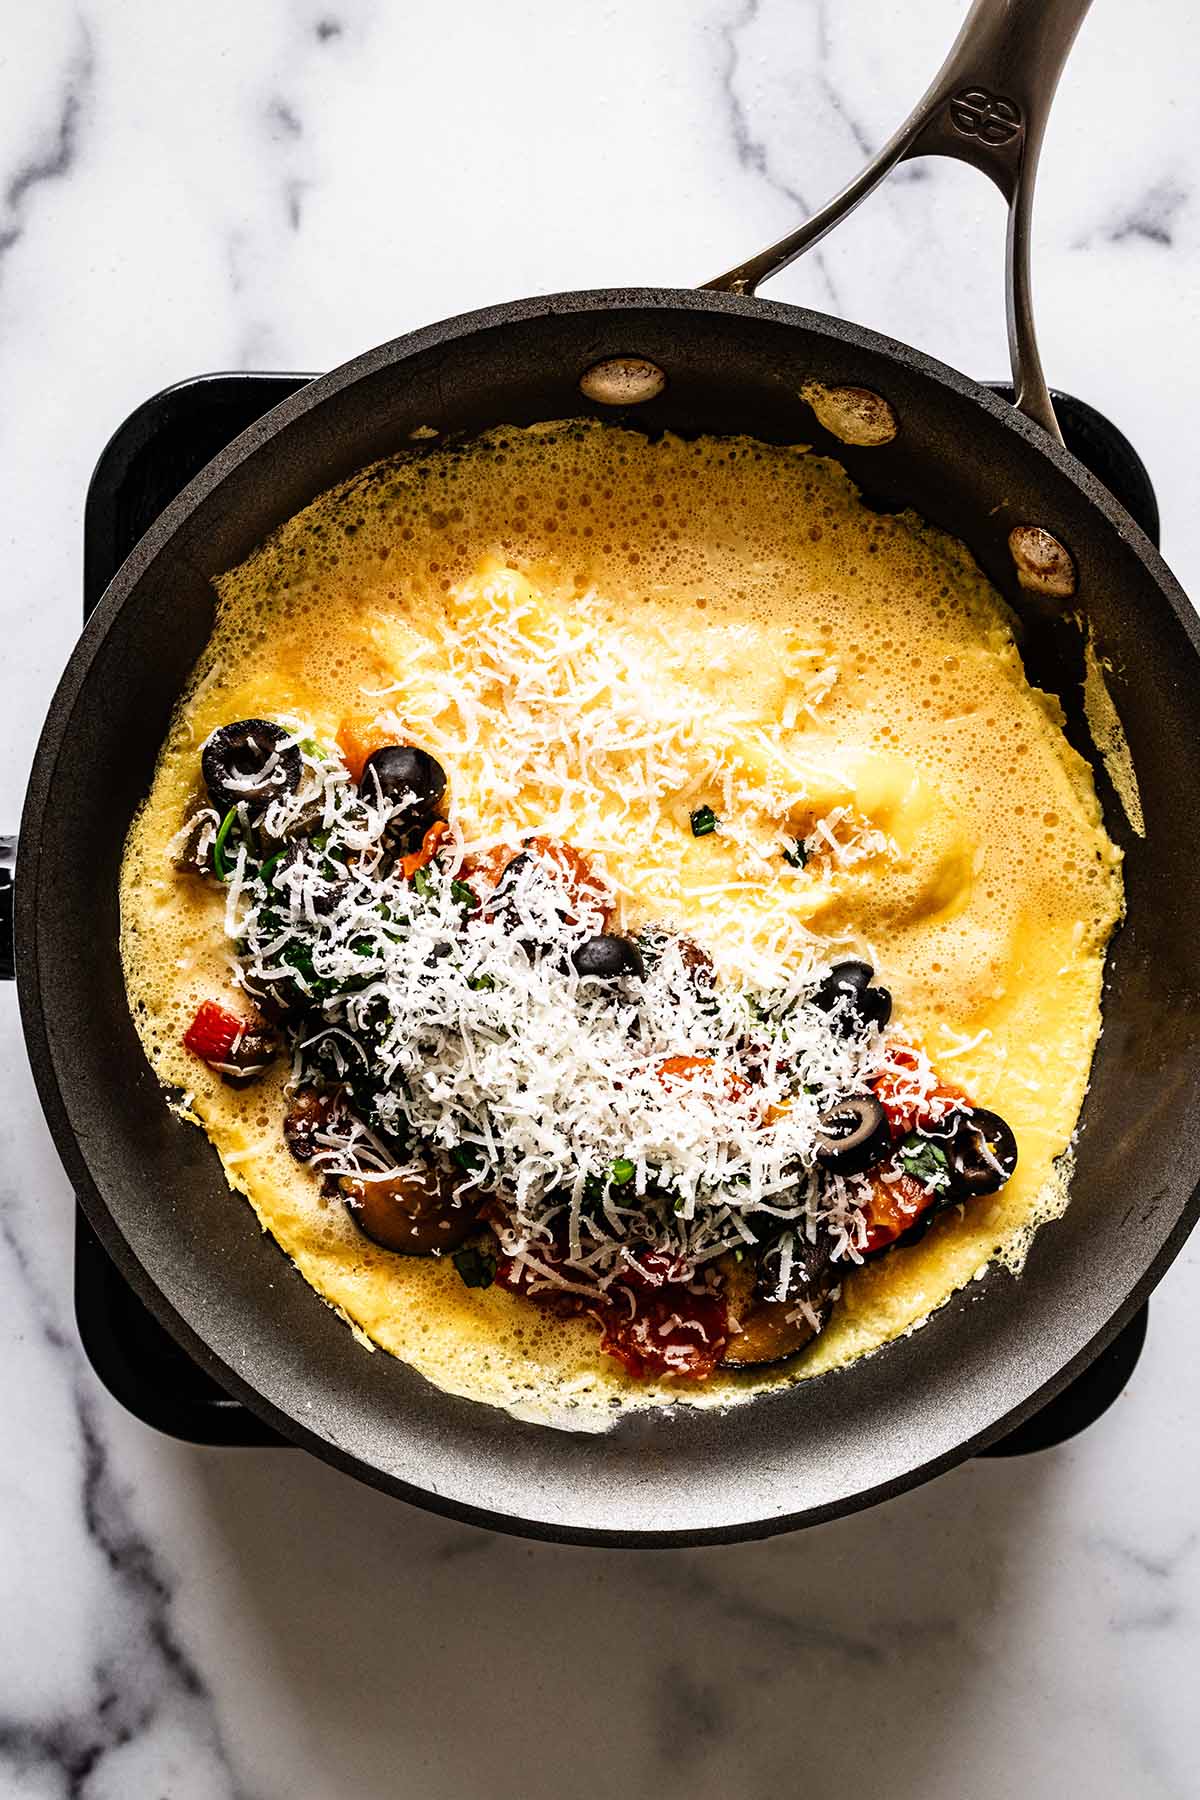 Grated Parmesan cheese on cooked vegetables on top of omelette in a skillet